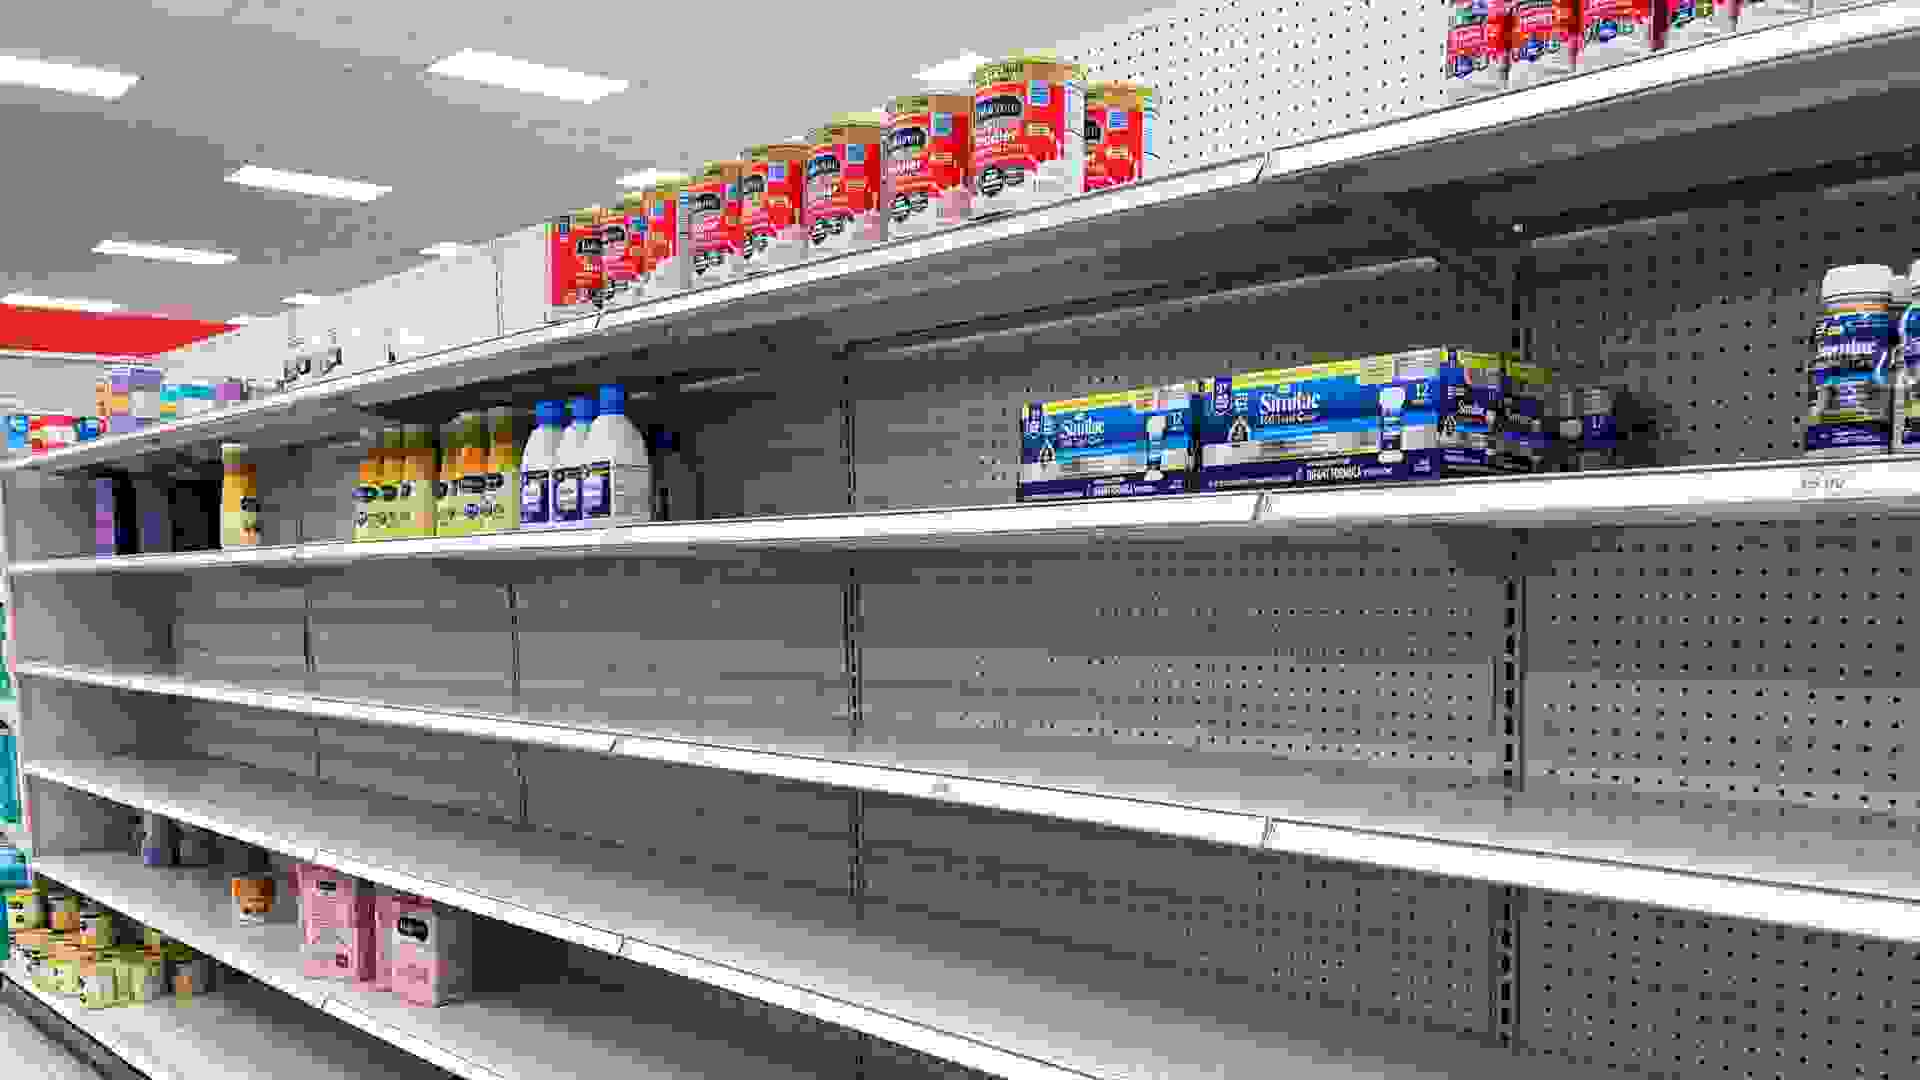 Mandatory Credit: Photo by Paul Hennessy/SOPA Images/Shutterstock (12931655e)A nearly empty baby formula display shelf is seen at a Target store in Orlando.